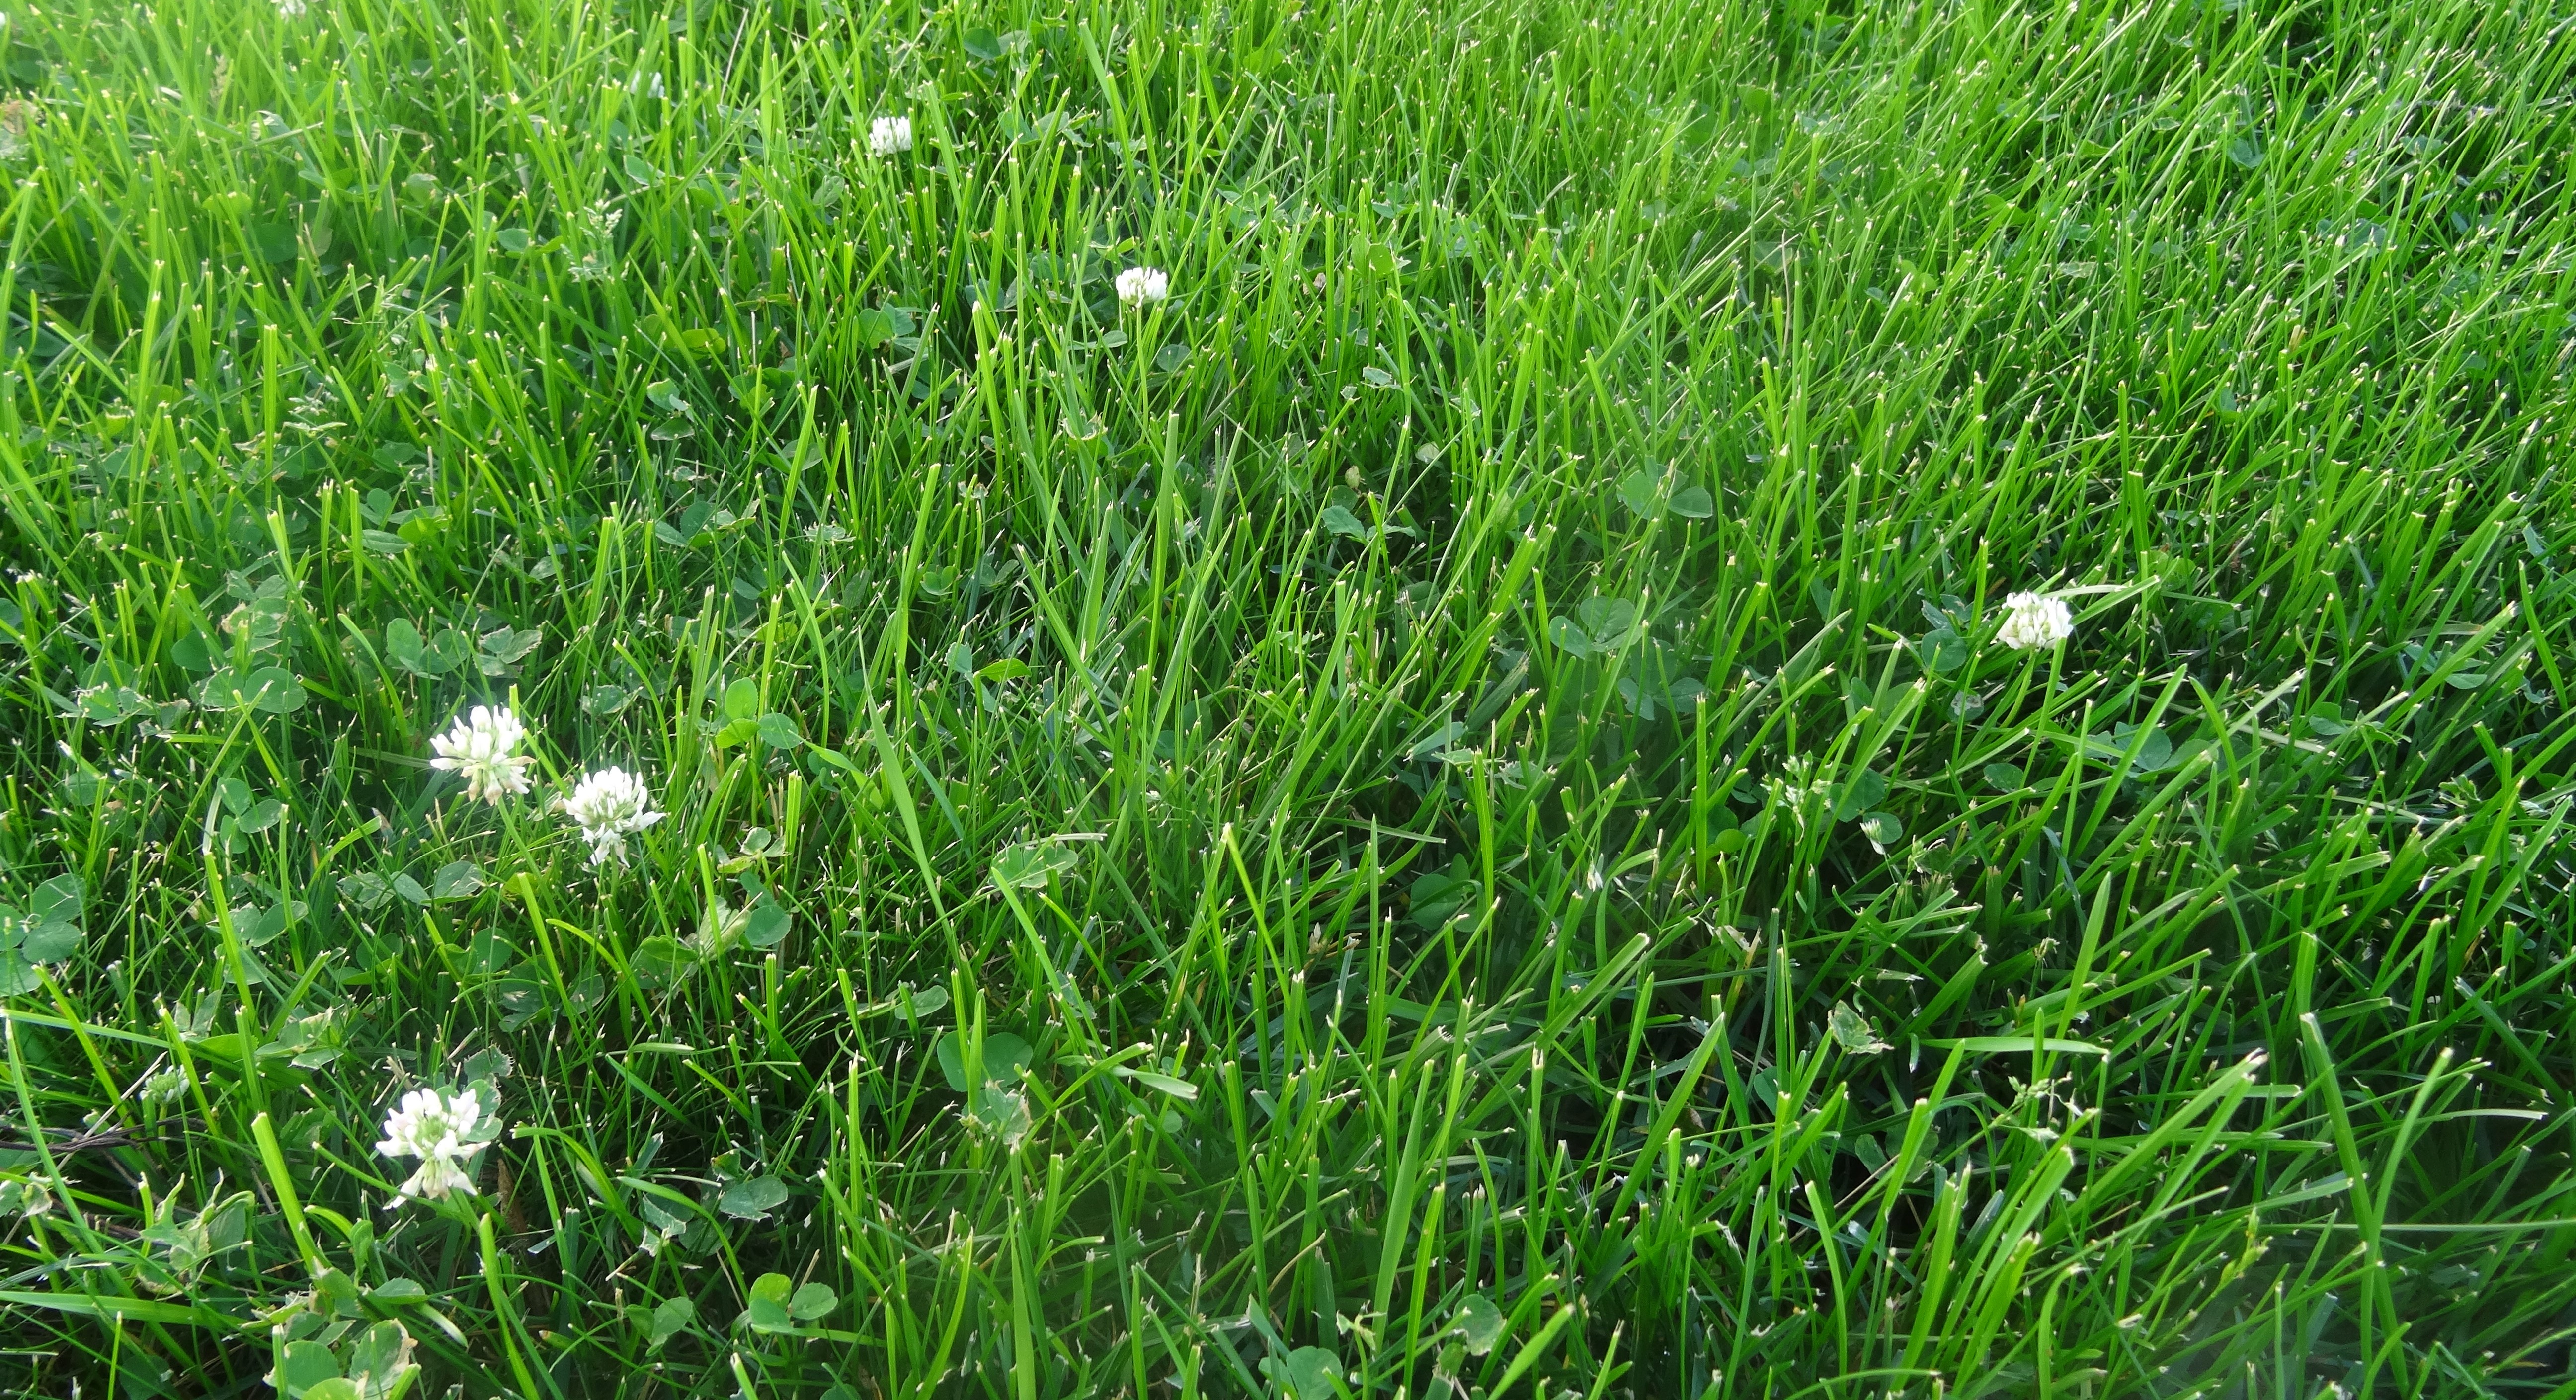 green residential lawn with several white clover flowers